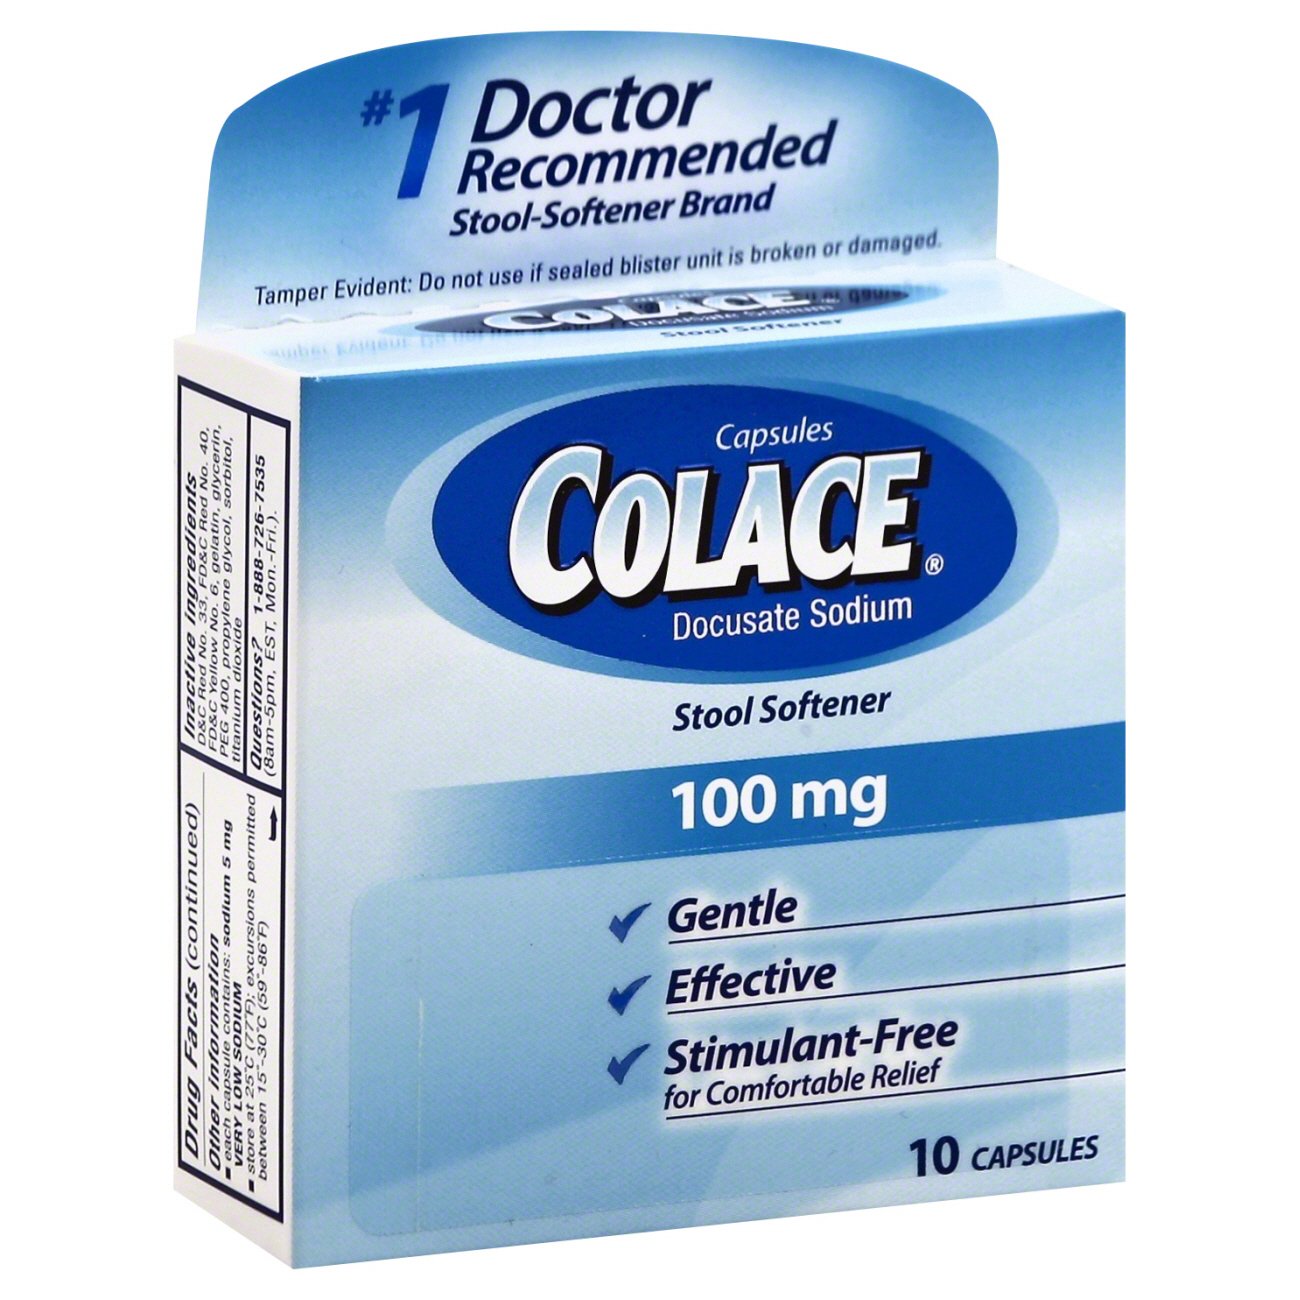 Colace Stool Softener 100 Mg Capsules Shop Digestion Nausea At H E B